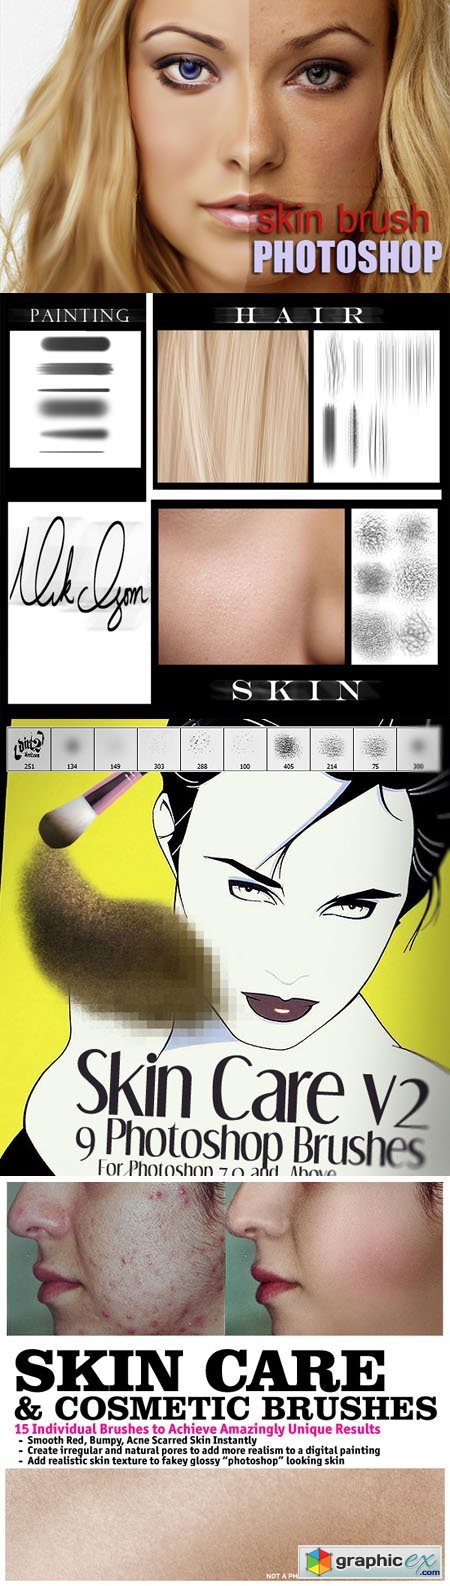 Skin Care & Cosmetic Brushes for Photoshop